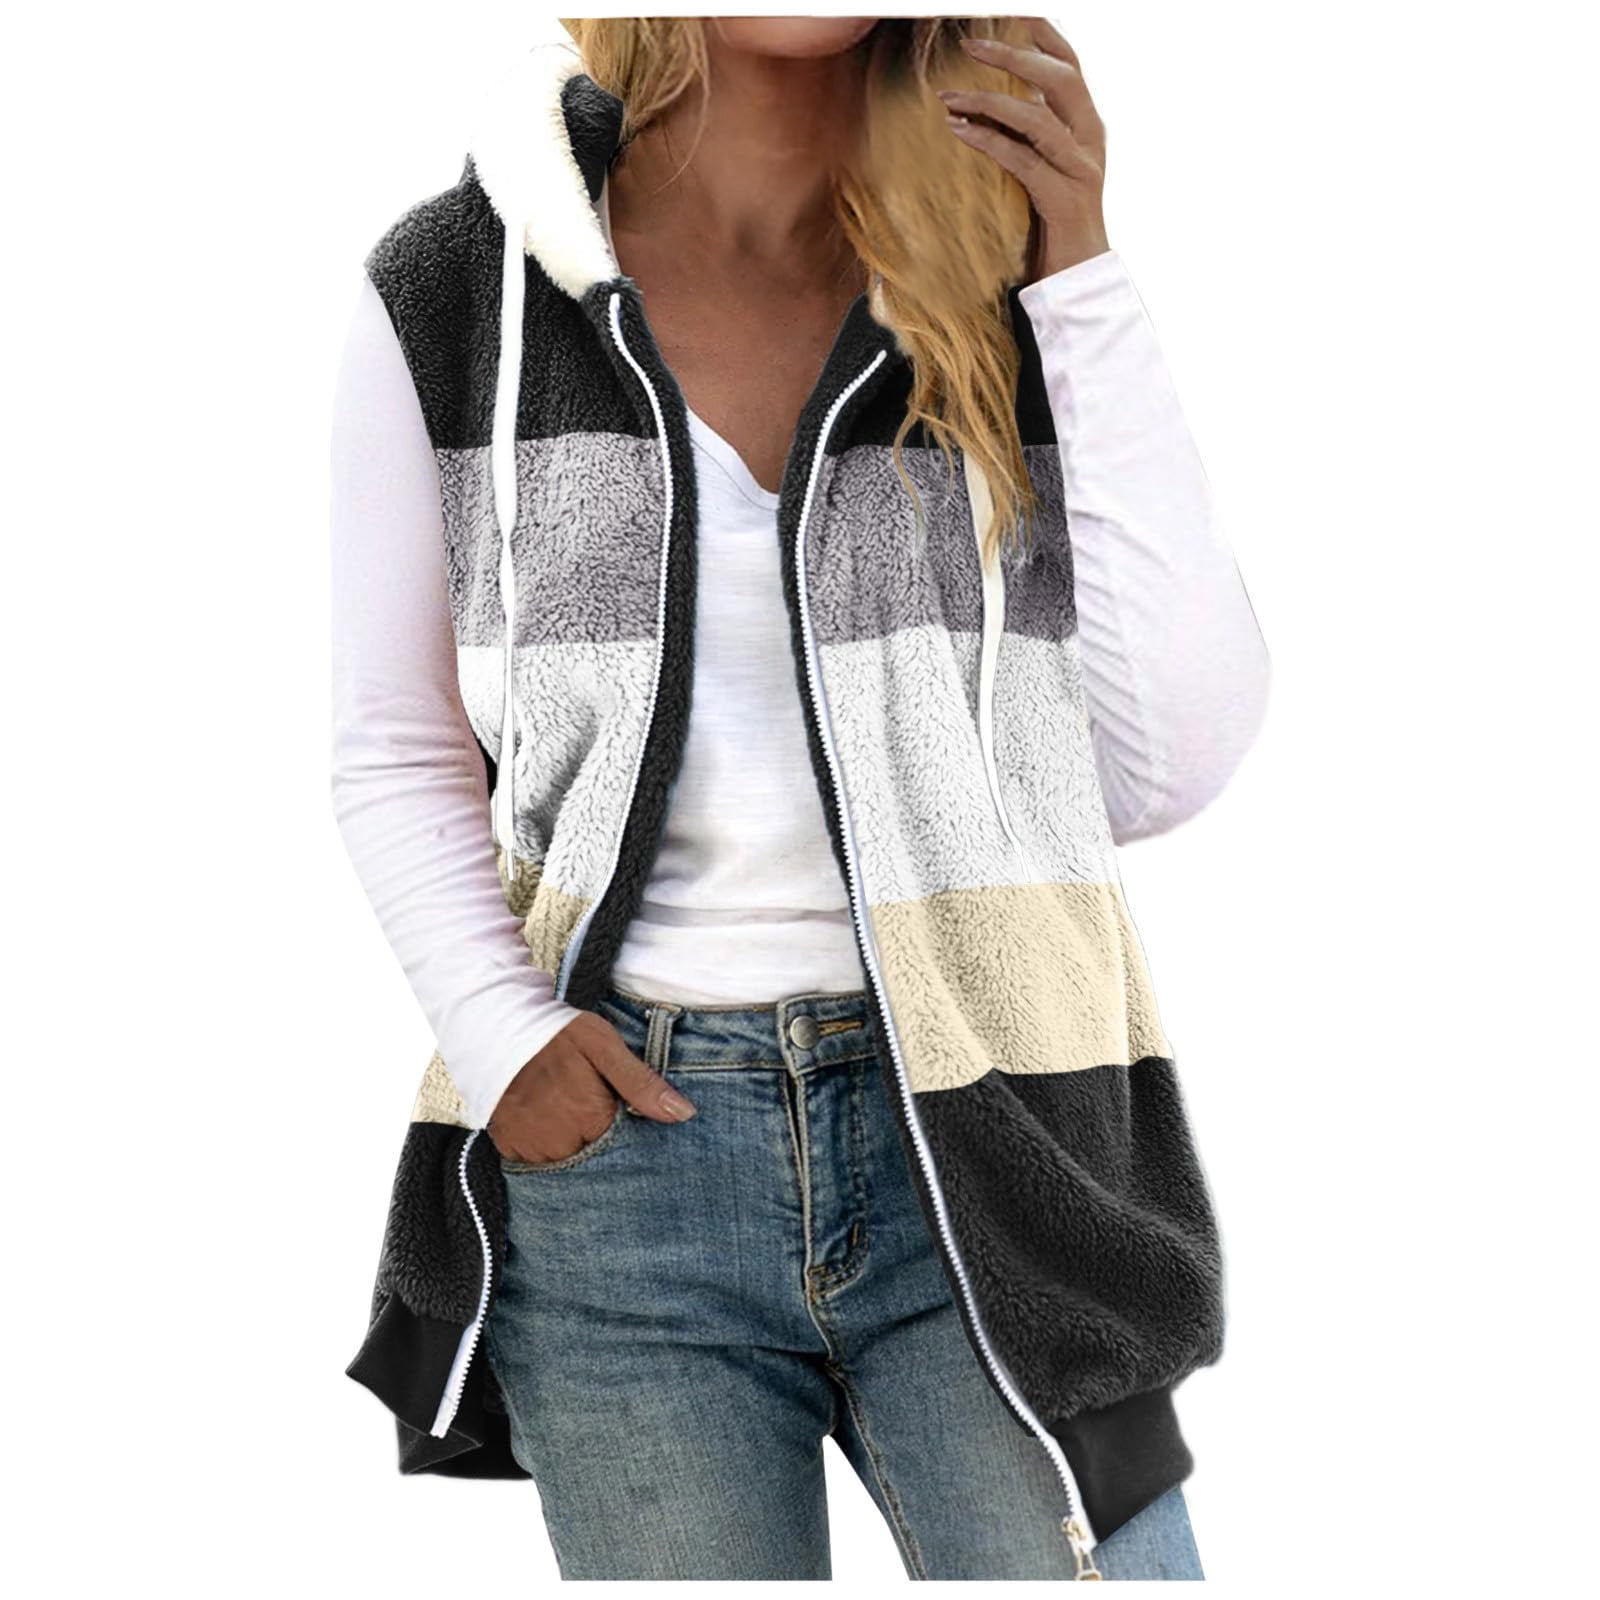 SMihono Clearance Ladies Sleeveless Hooded Casual Outwear Jackets Womens  Fall Winter Coat Zip Up Warm Jackets Outerwear With Pockets Black 16 